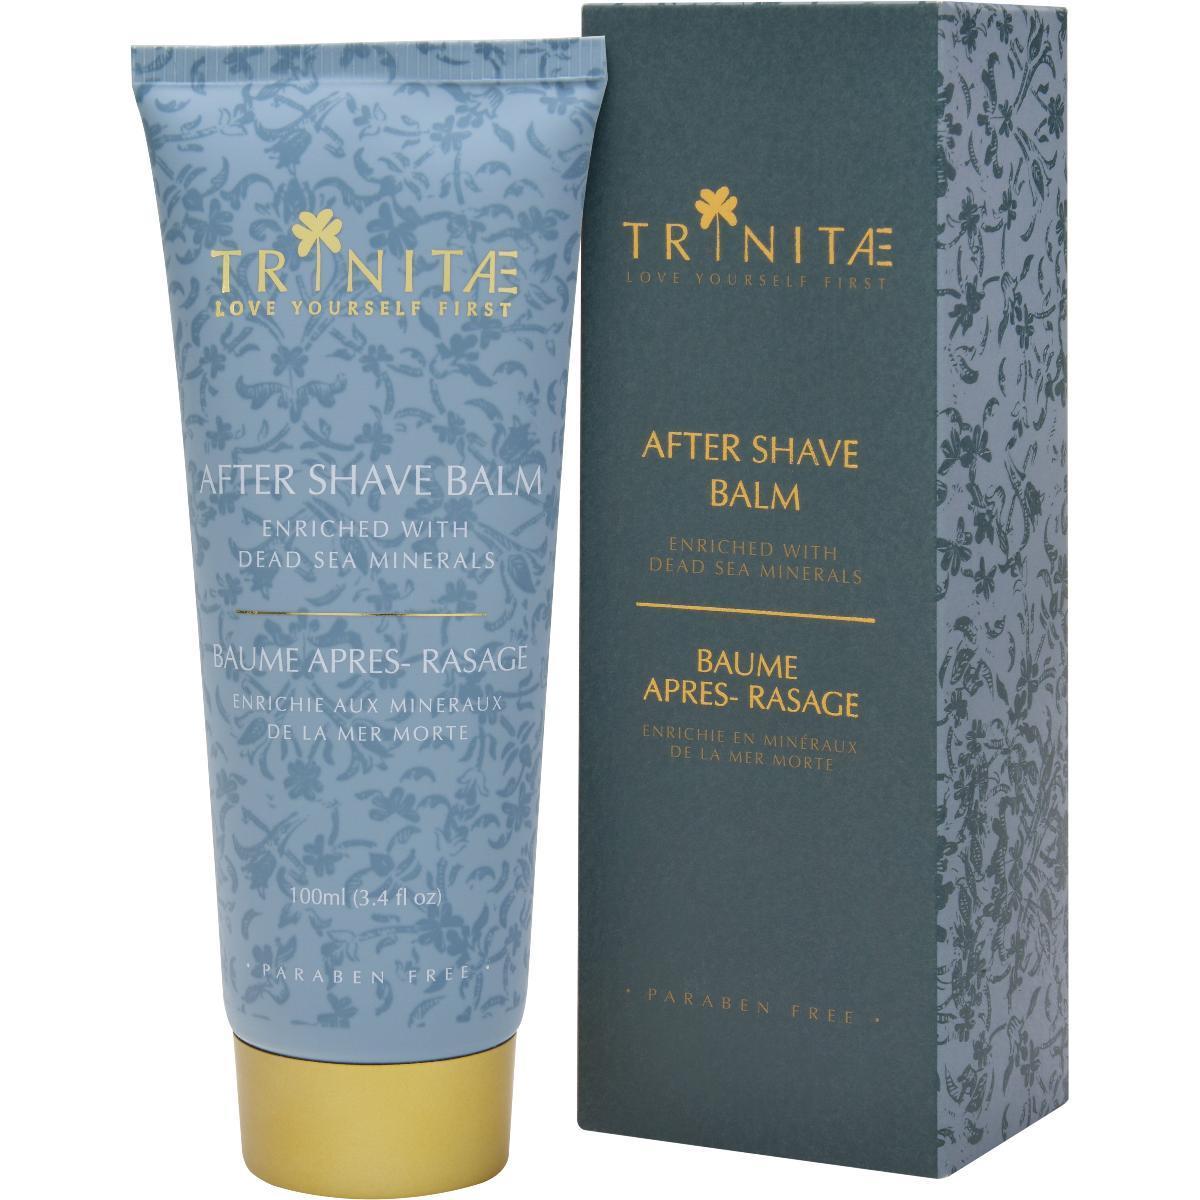 After Shave Balm Enriched With Dead Sea Minerals